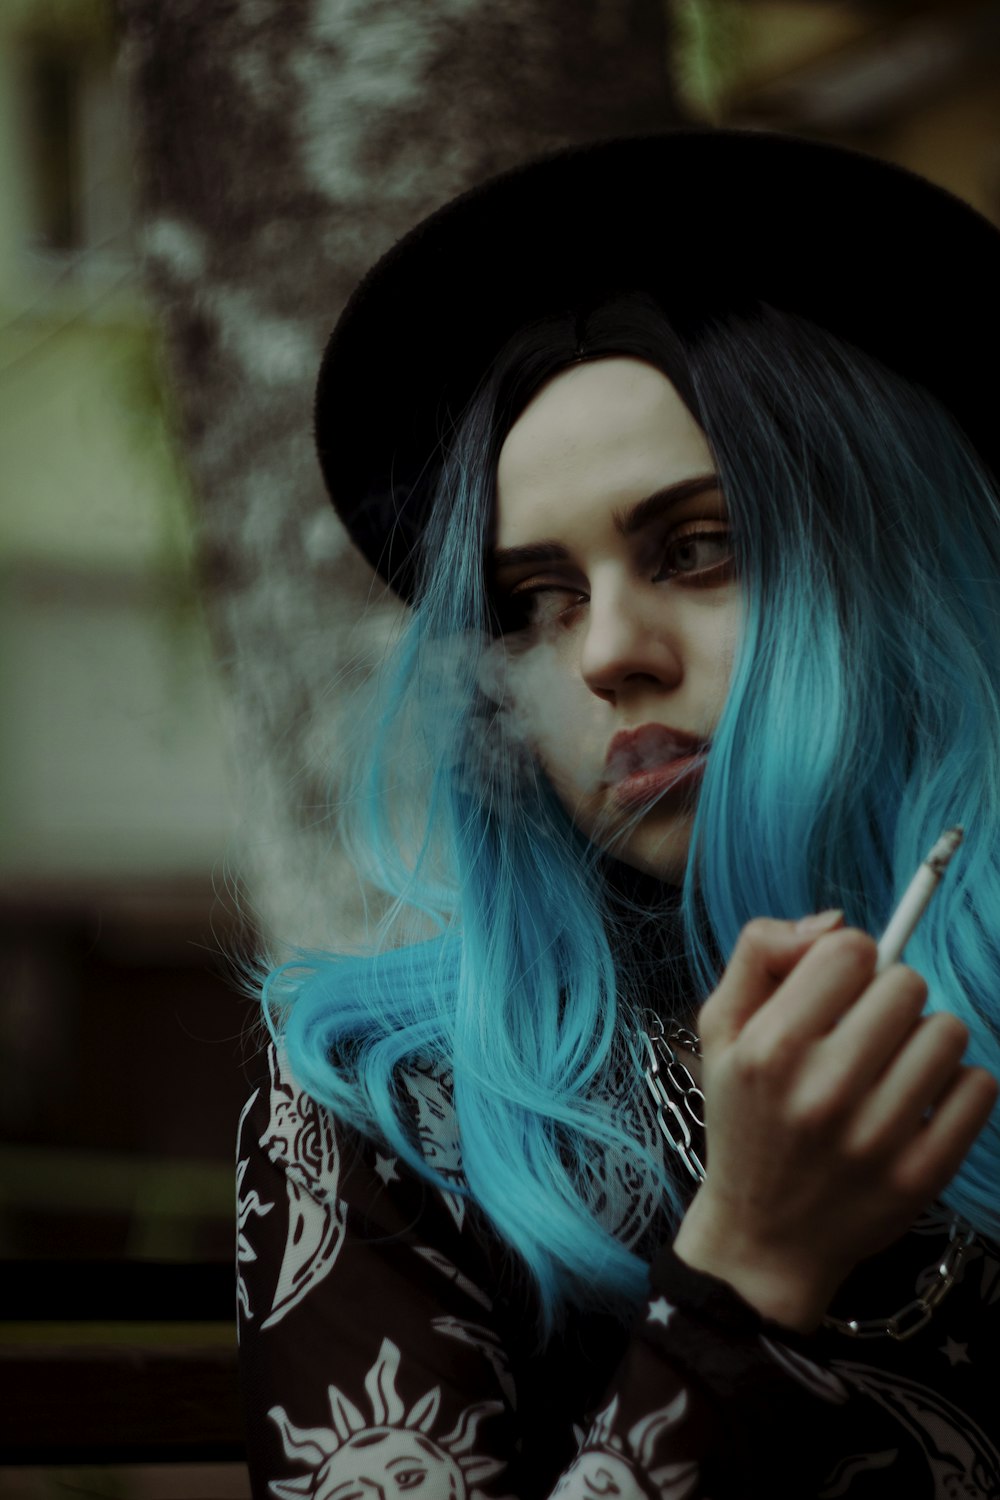 a woman with blue hair smoking a cigarette